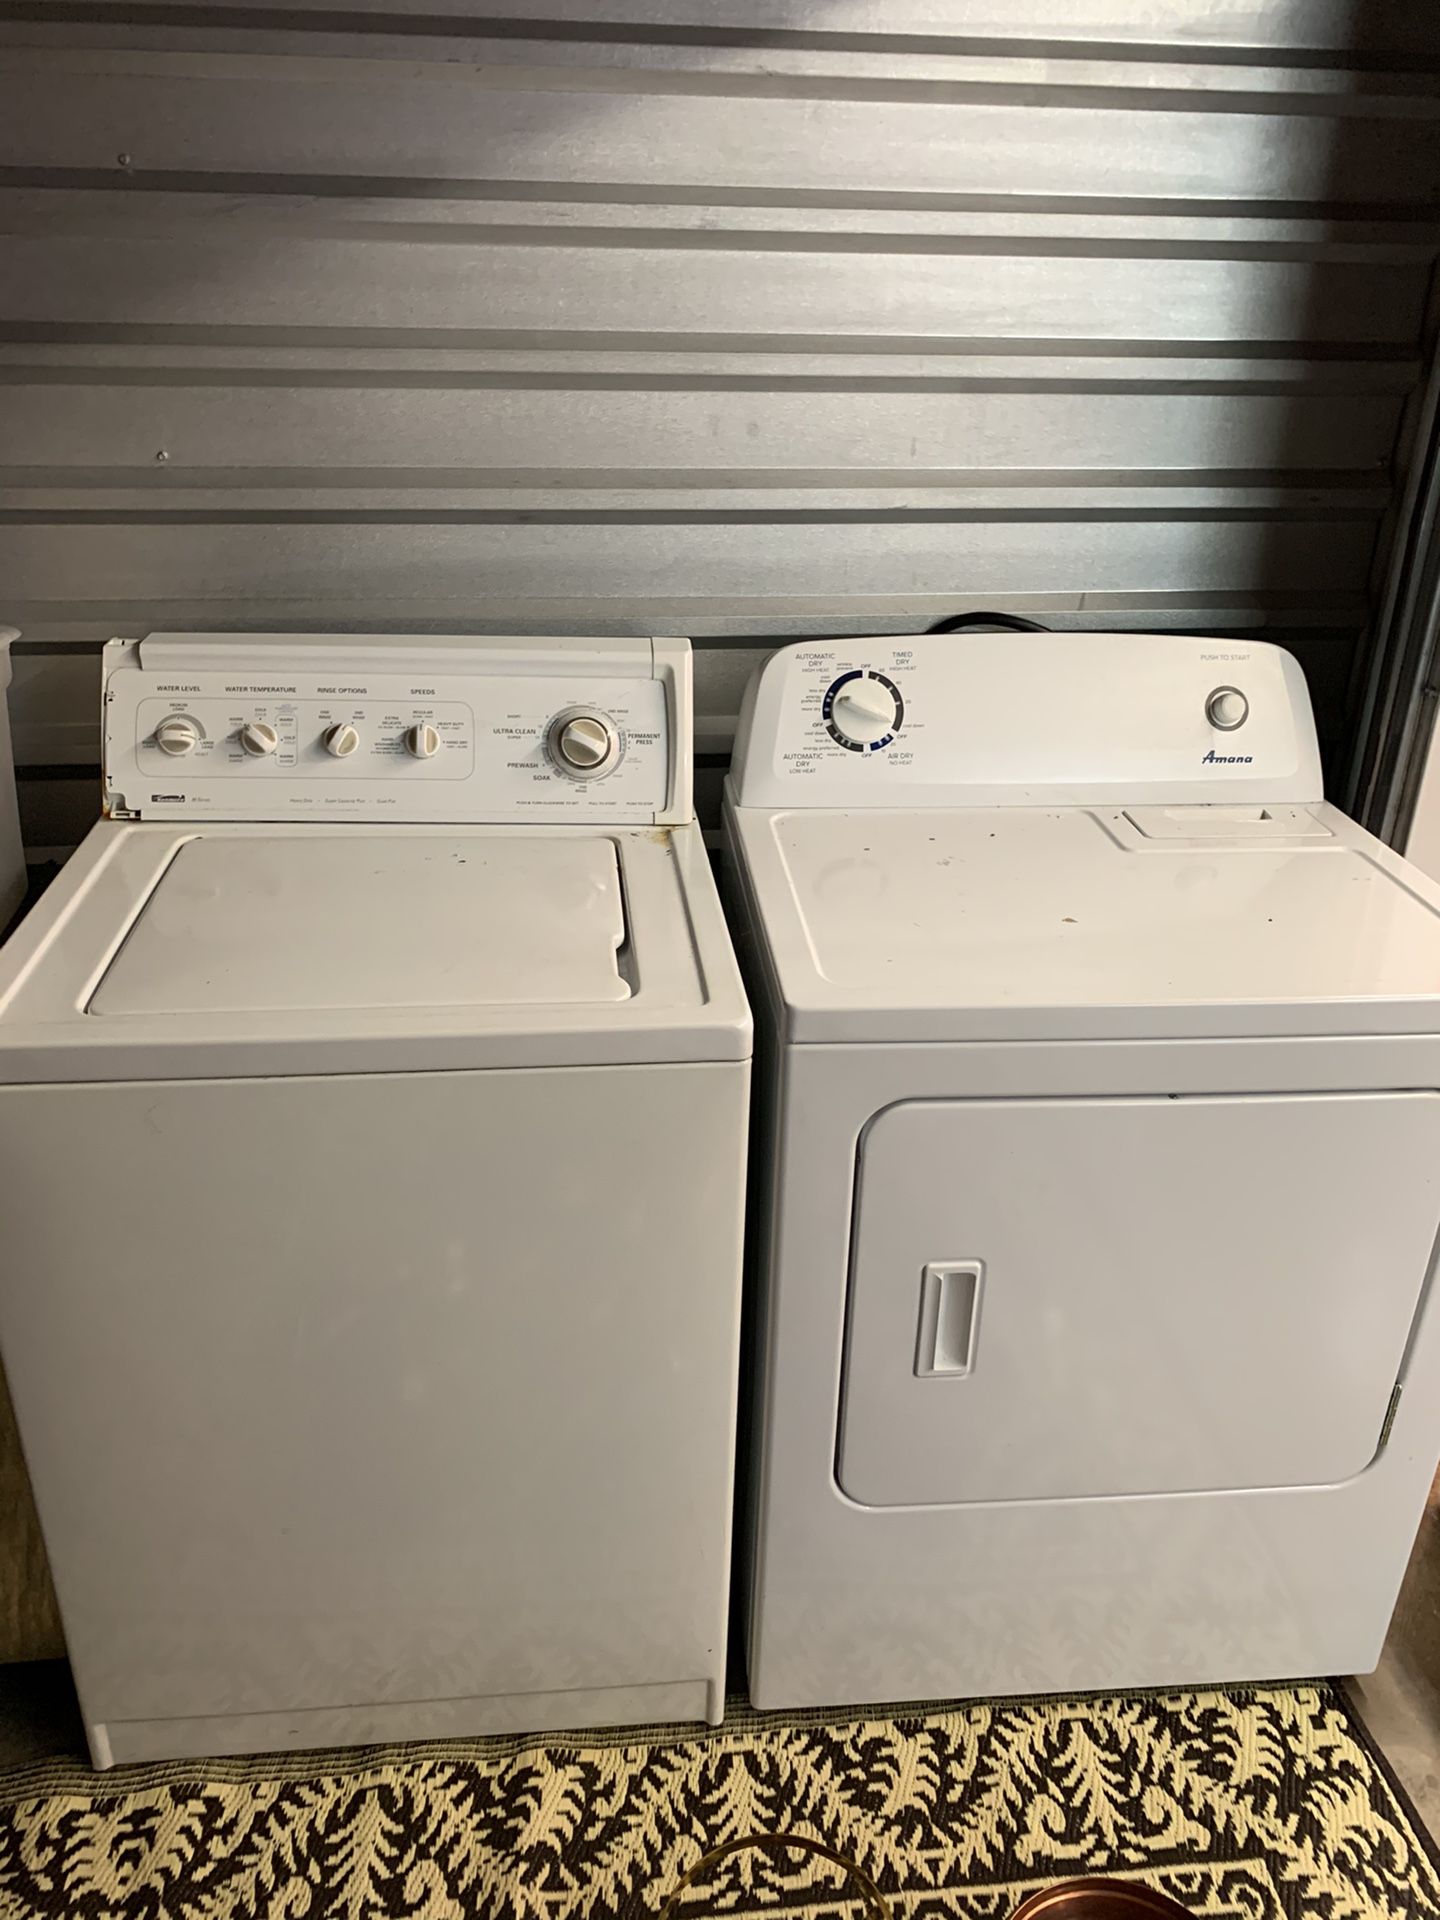 Kenmore washer and Amana dryer in good condition